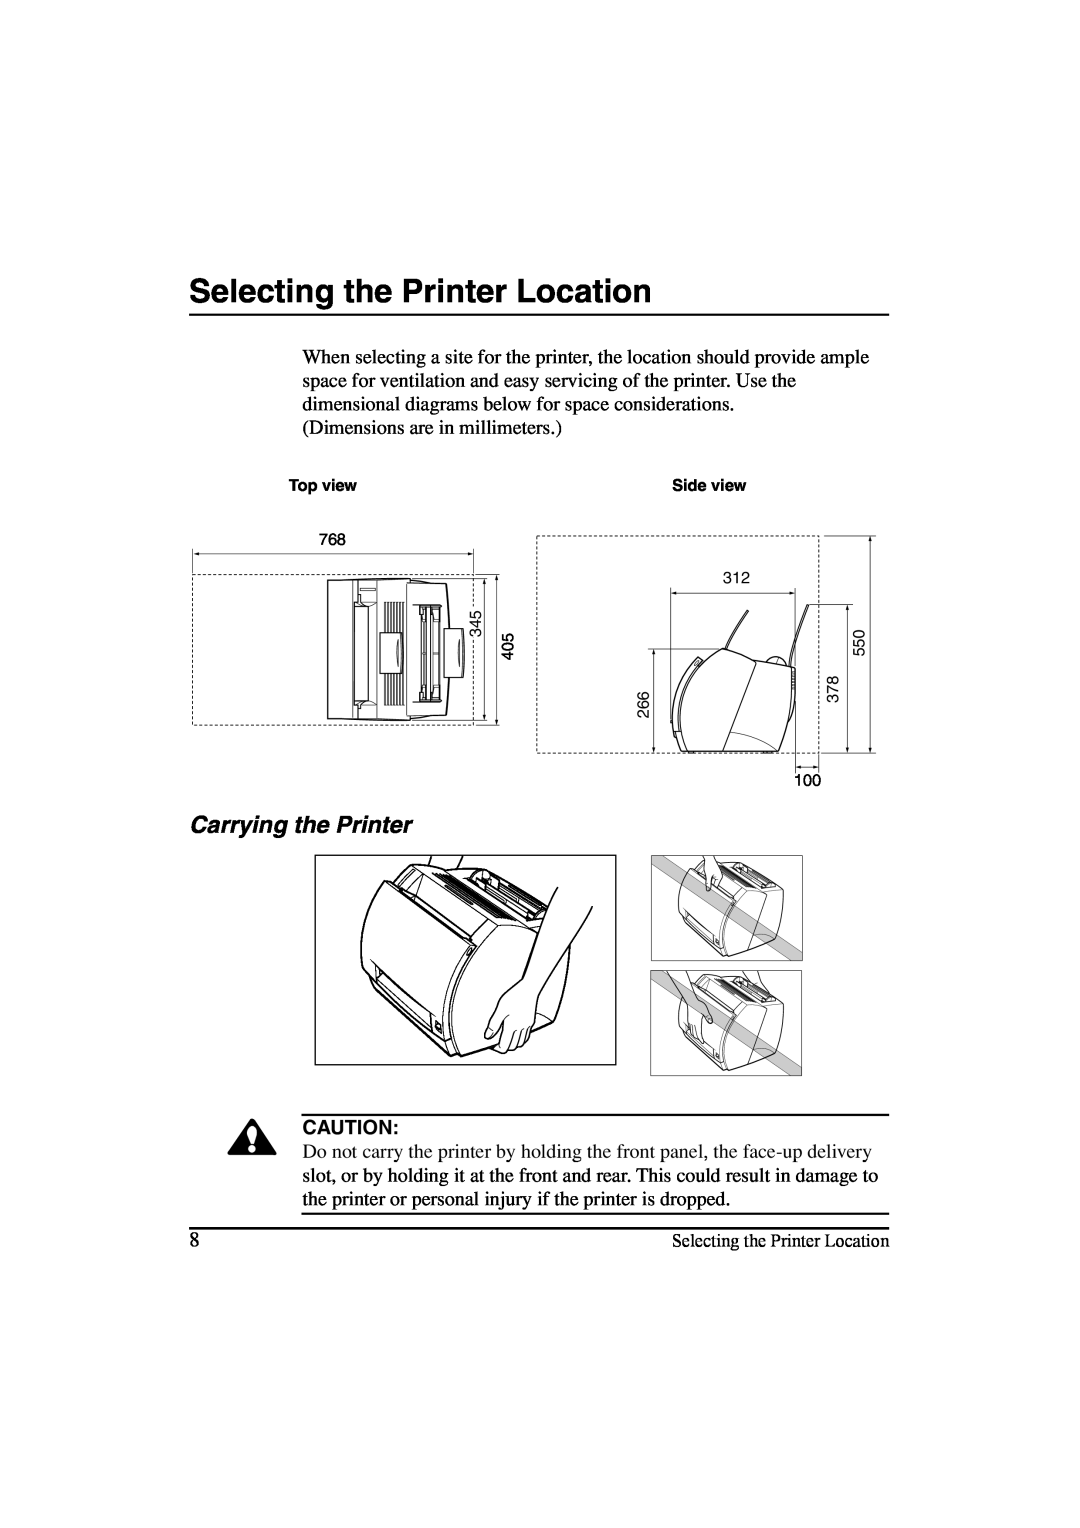 Canon LBP-810 manual Selecting the Printer Location, Carrying the Printer 